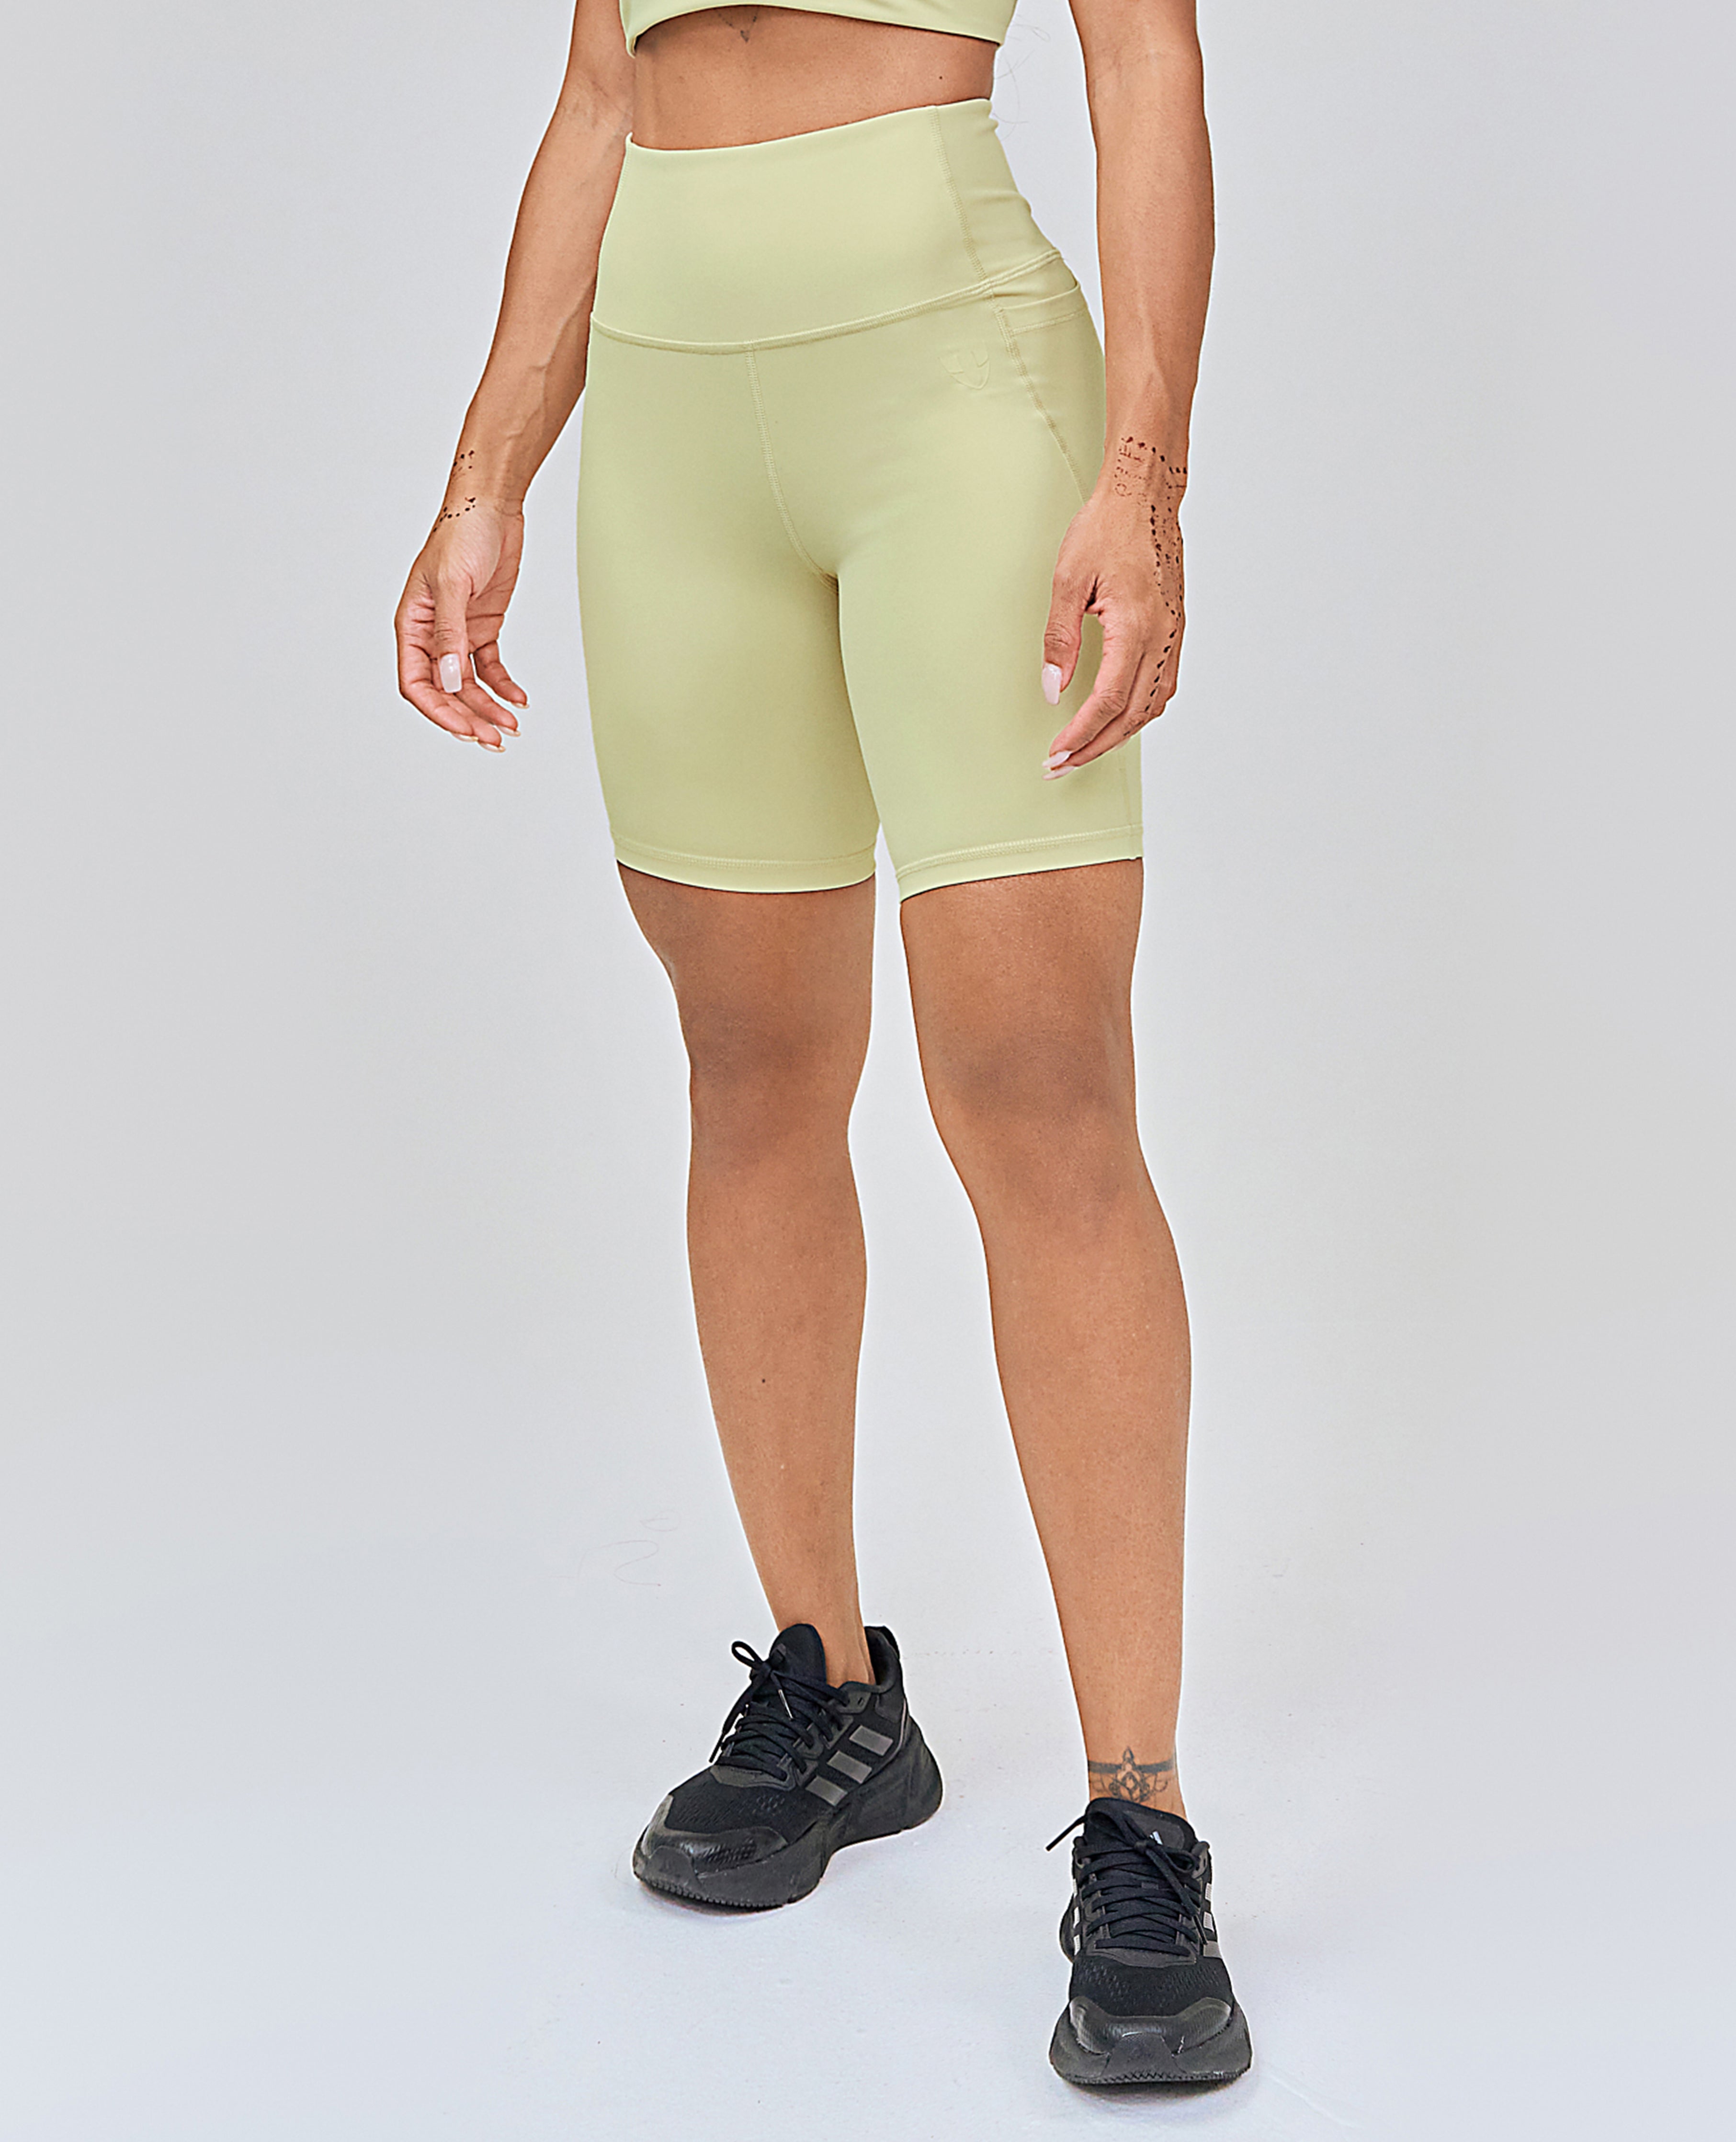 Womens Cargo High Waisted Workout Shorts With Scrunch Butt And Drawstring  Perfect For Gym, Yoga, And Fitness Includes Pocket Sexy And Tight Workout  Shirts Style #230616 From Men02, $12.66